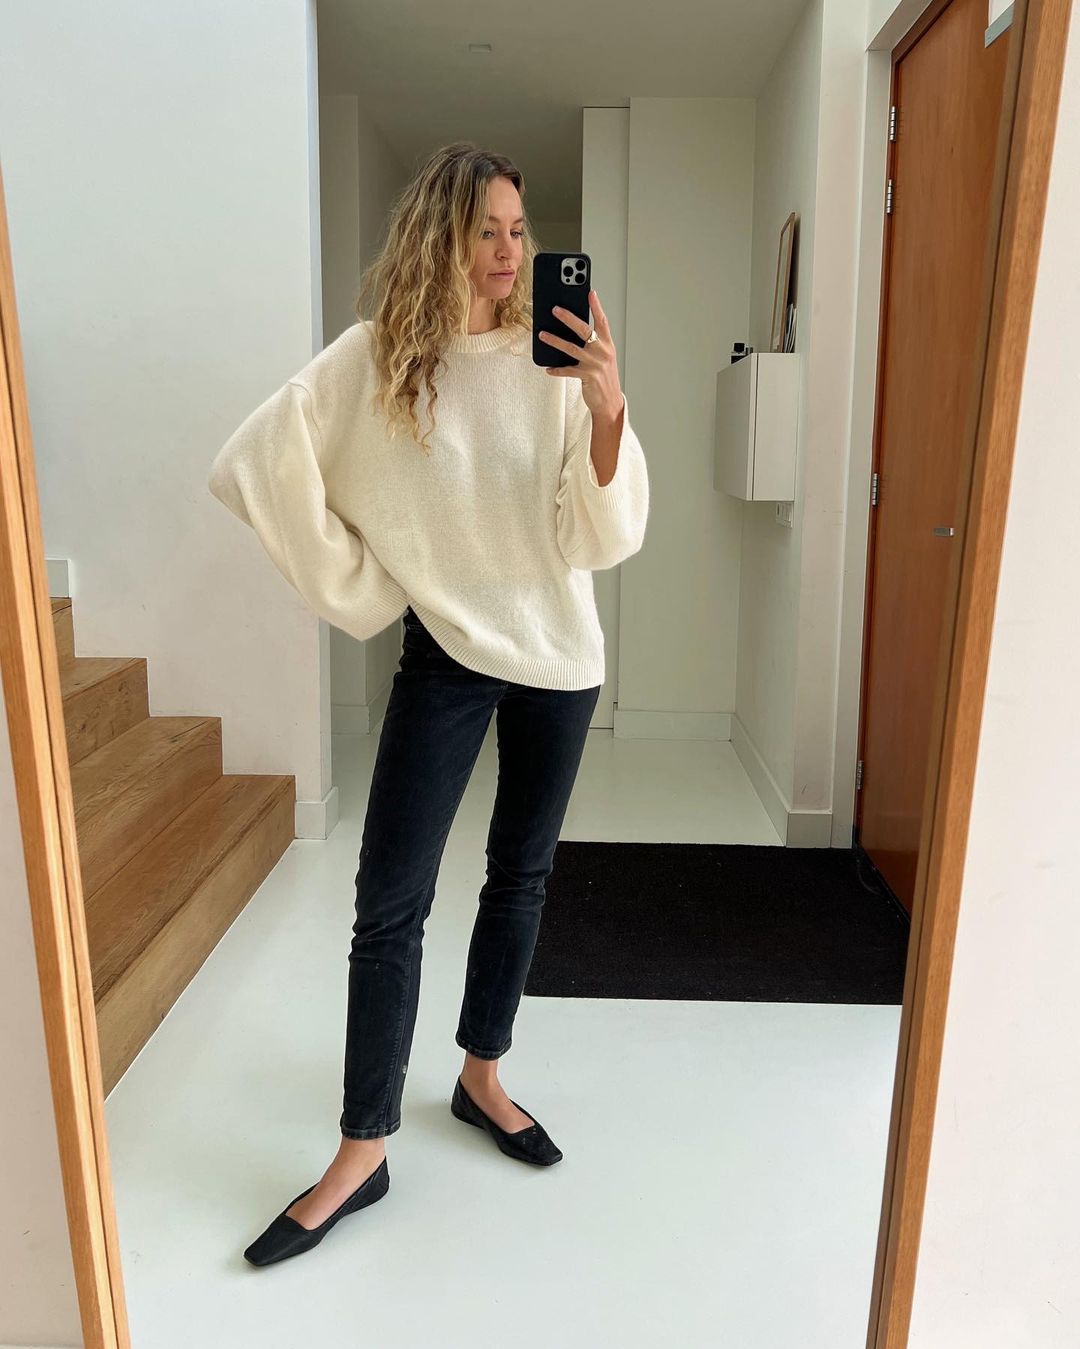 Black Jeans Outfits: RELAXED JUMPER + BALLET FLATS